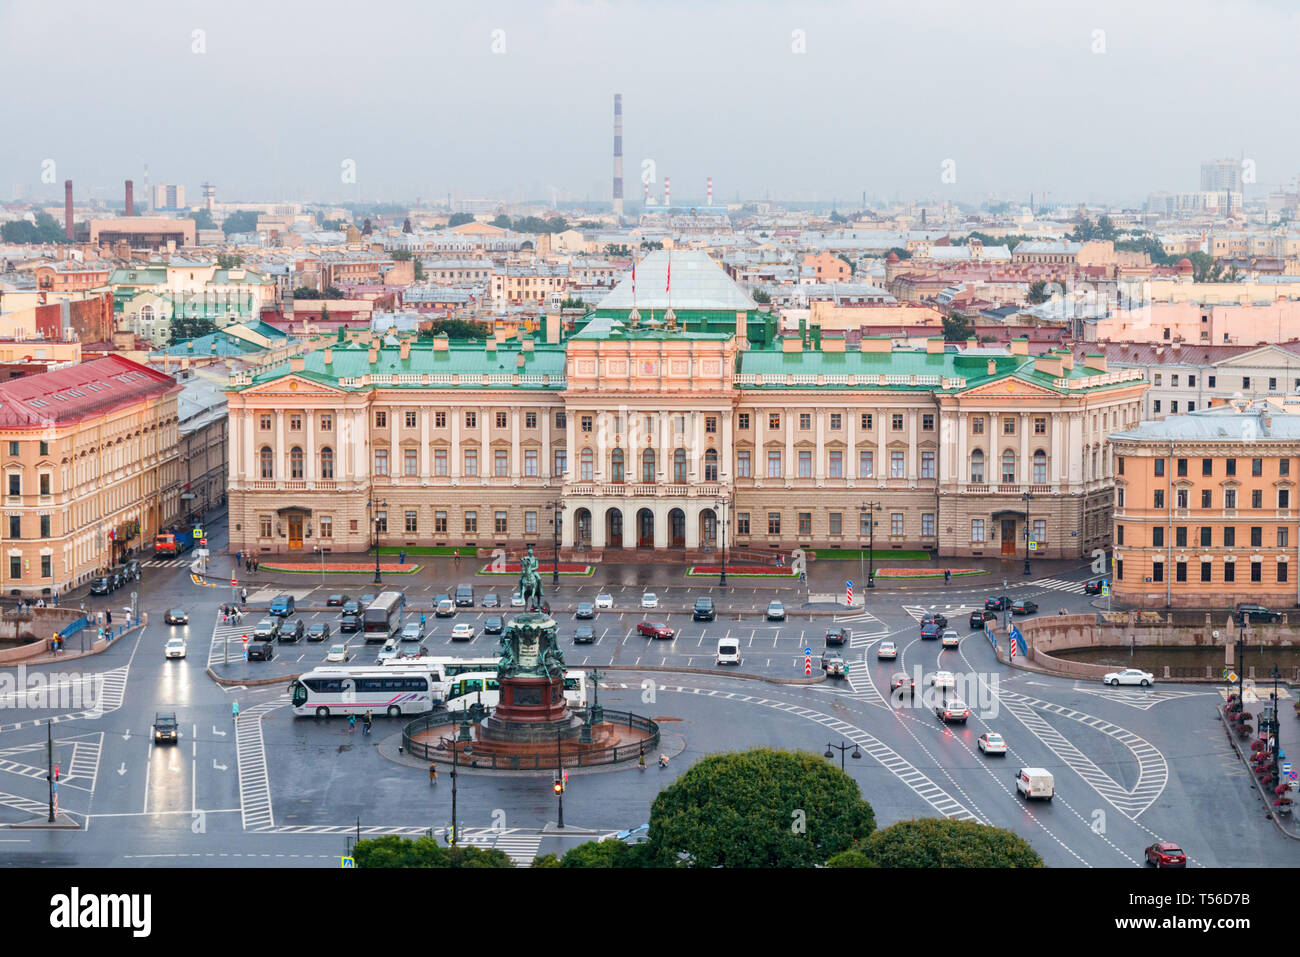 Aerial view of Saint Isaac's Square and the Mariinsky Palace under a cloudy sky. Russia, Saint Petersburg. Stock Photo